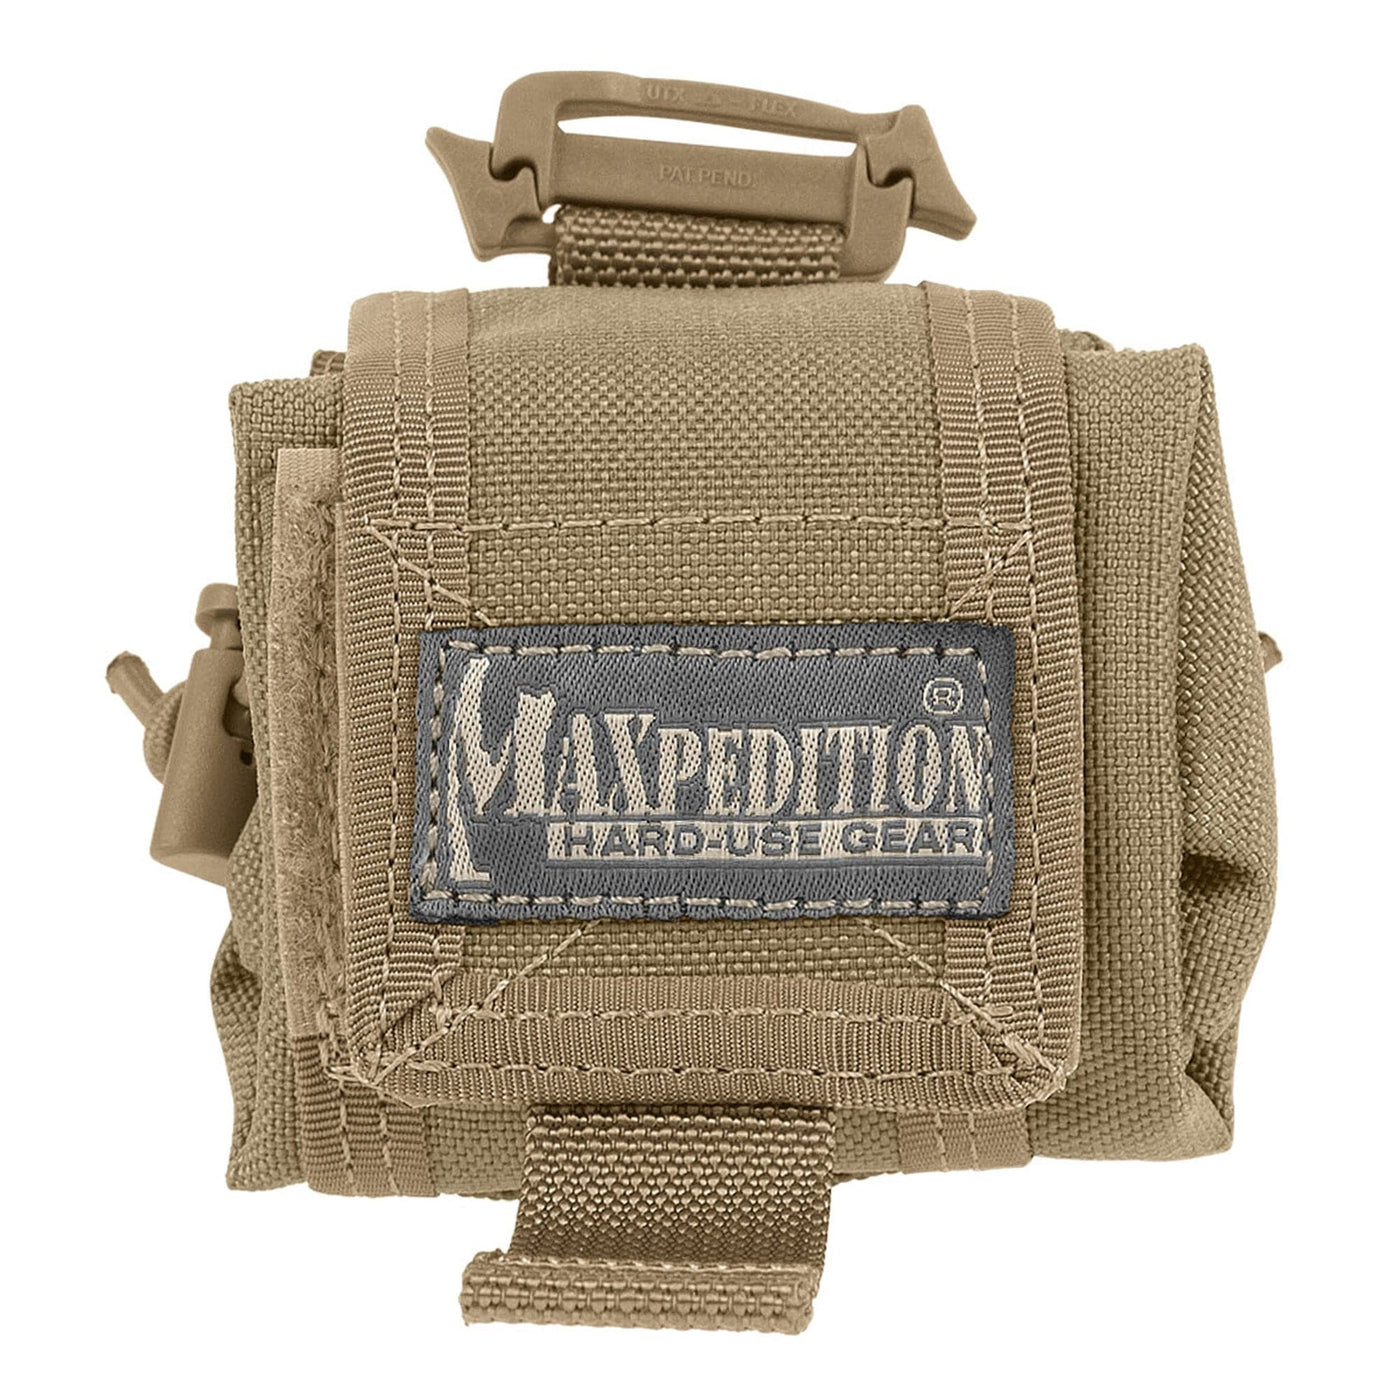 Maxpedition Maxpedition Rollypoly Mini Pch Khaki Holsters